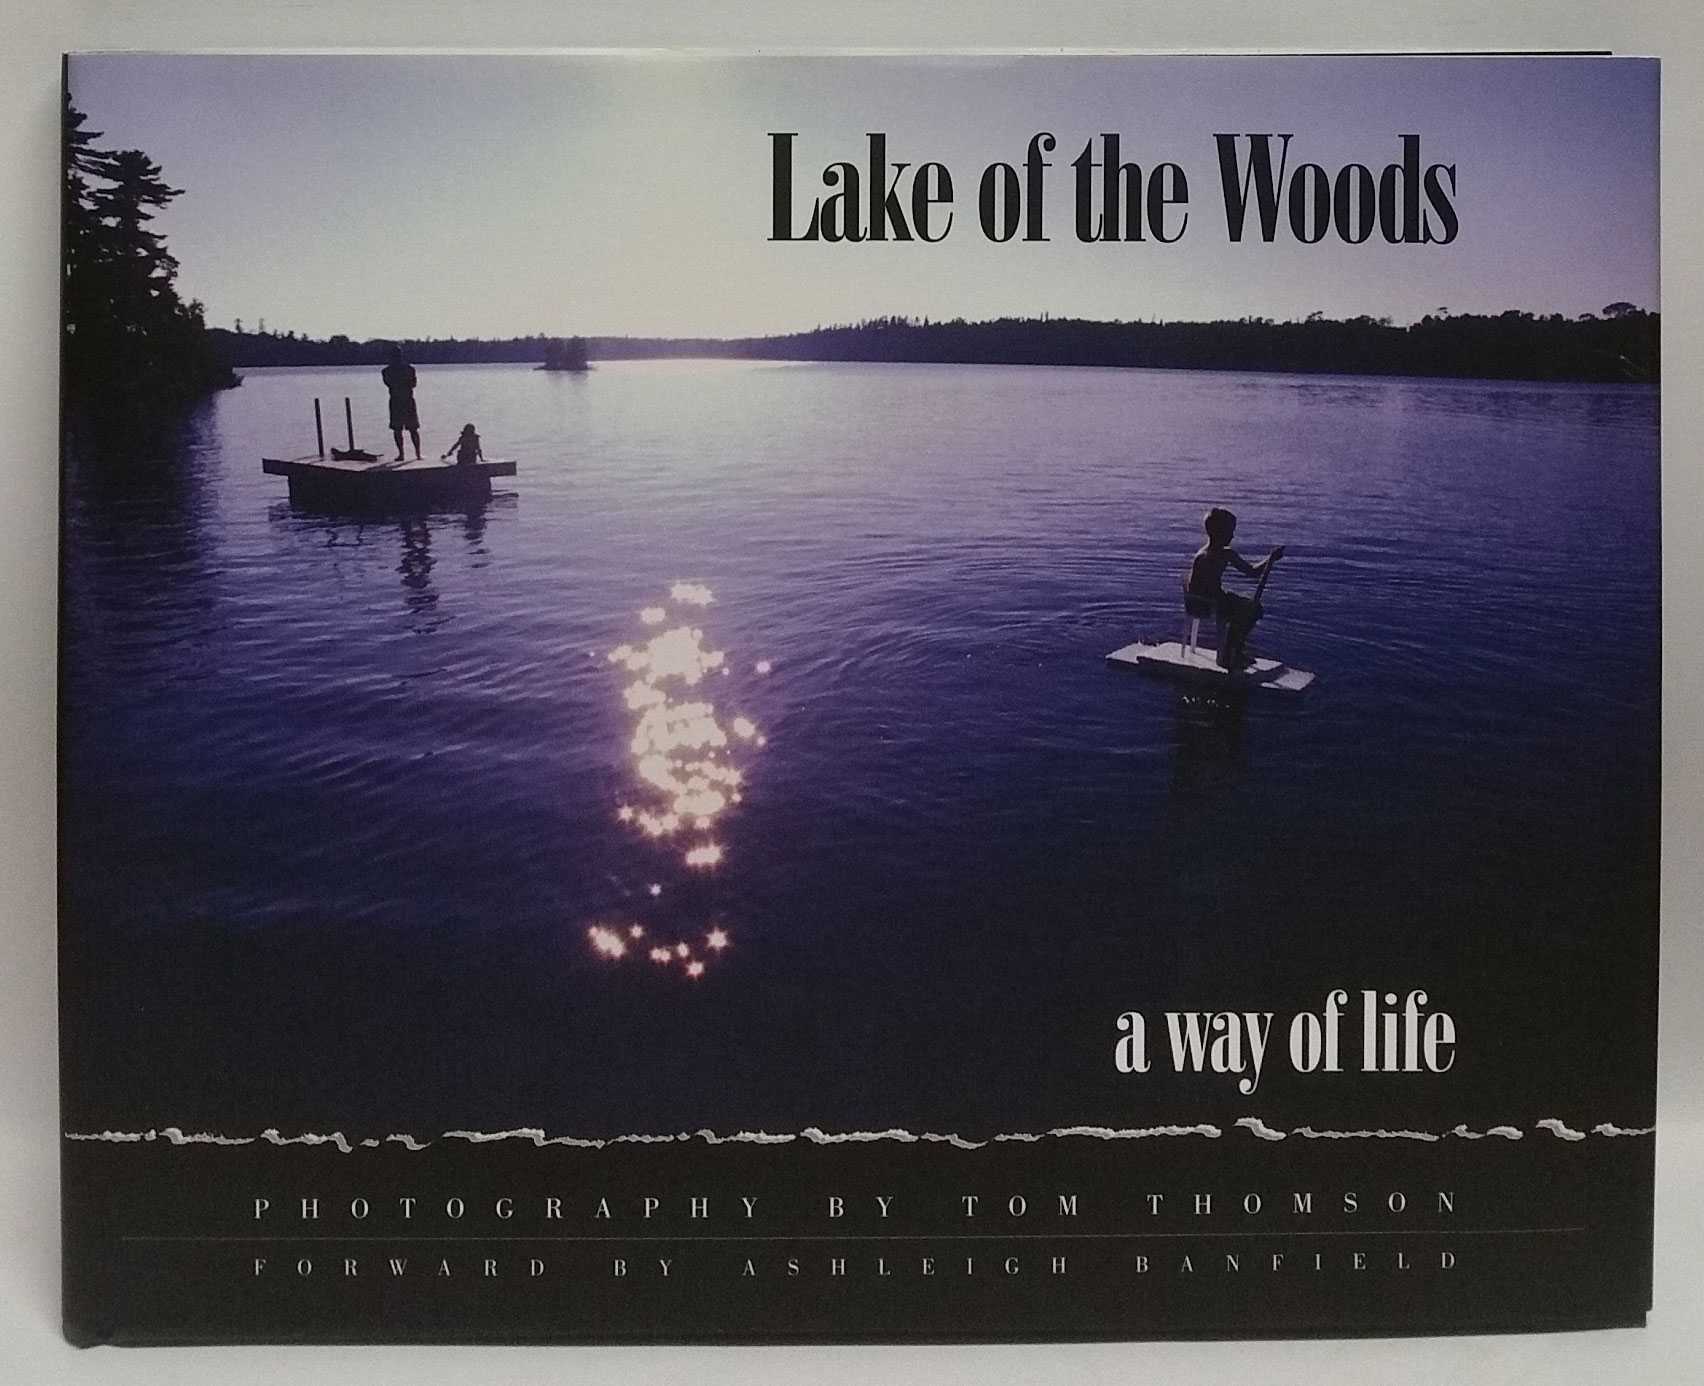 Tom Thomson - Lake of the Woods: A Way of Life